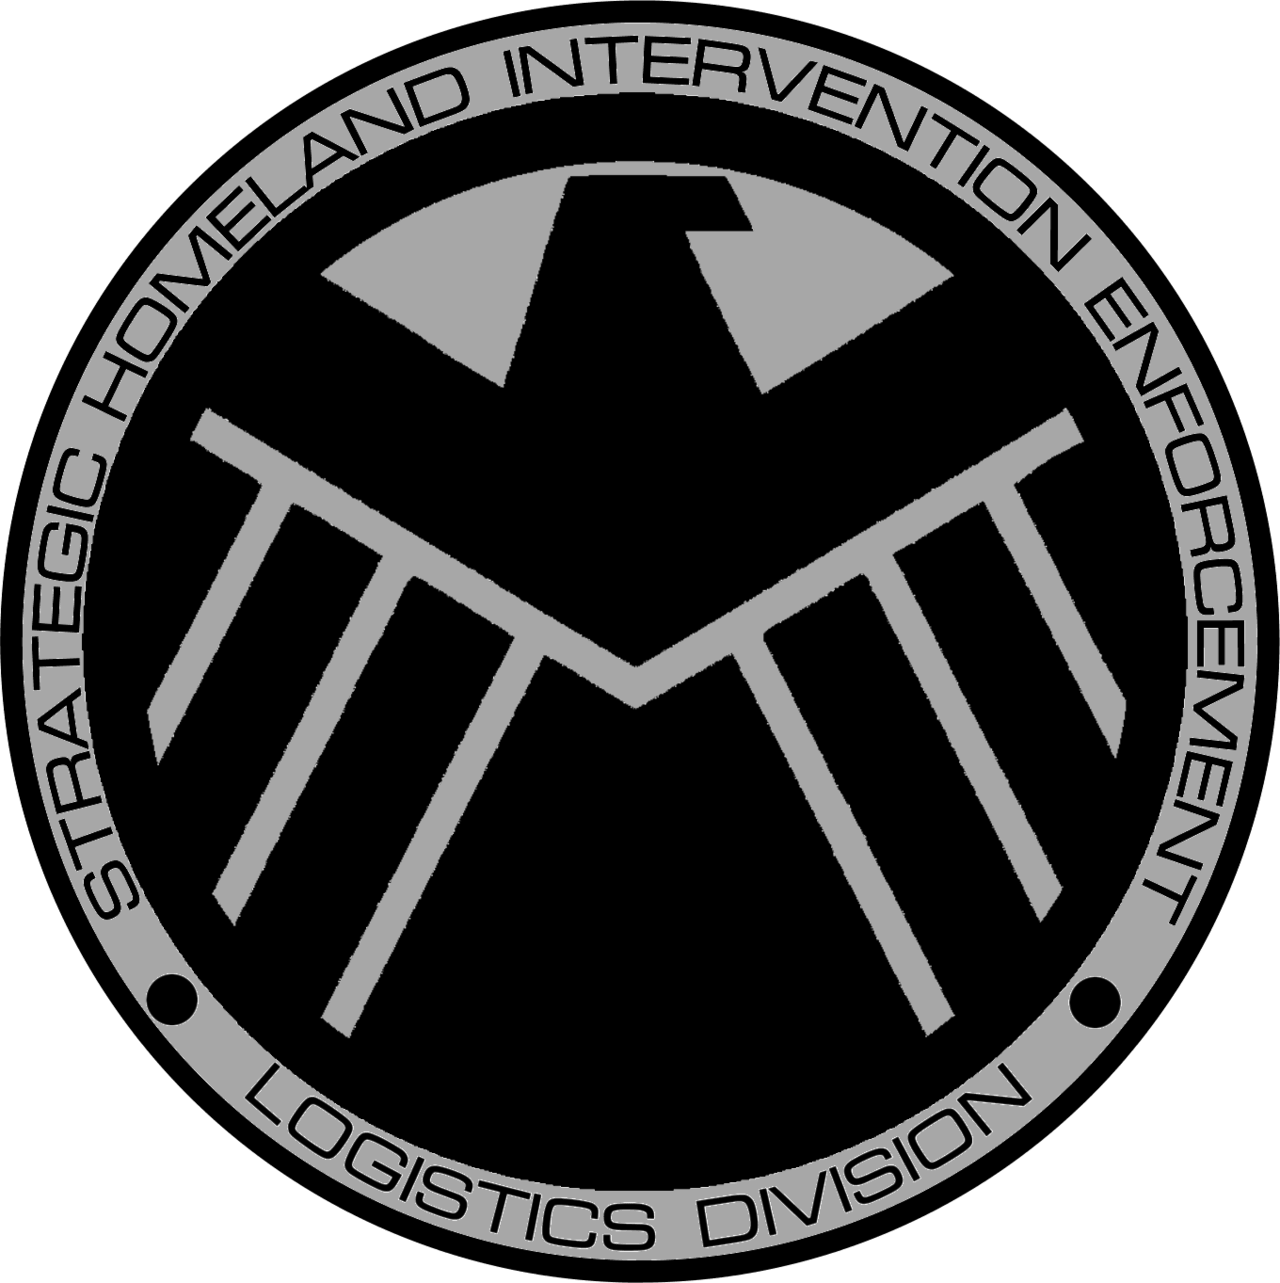 Marvel Shield Logo - Marvel's Agents of SHIELD Air Forces Insignia